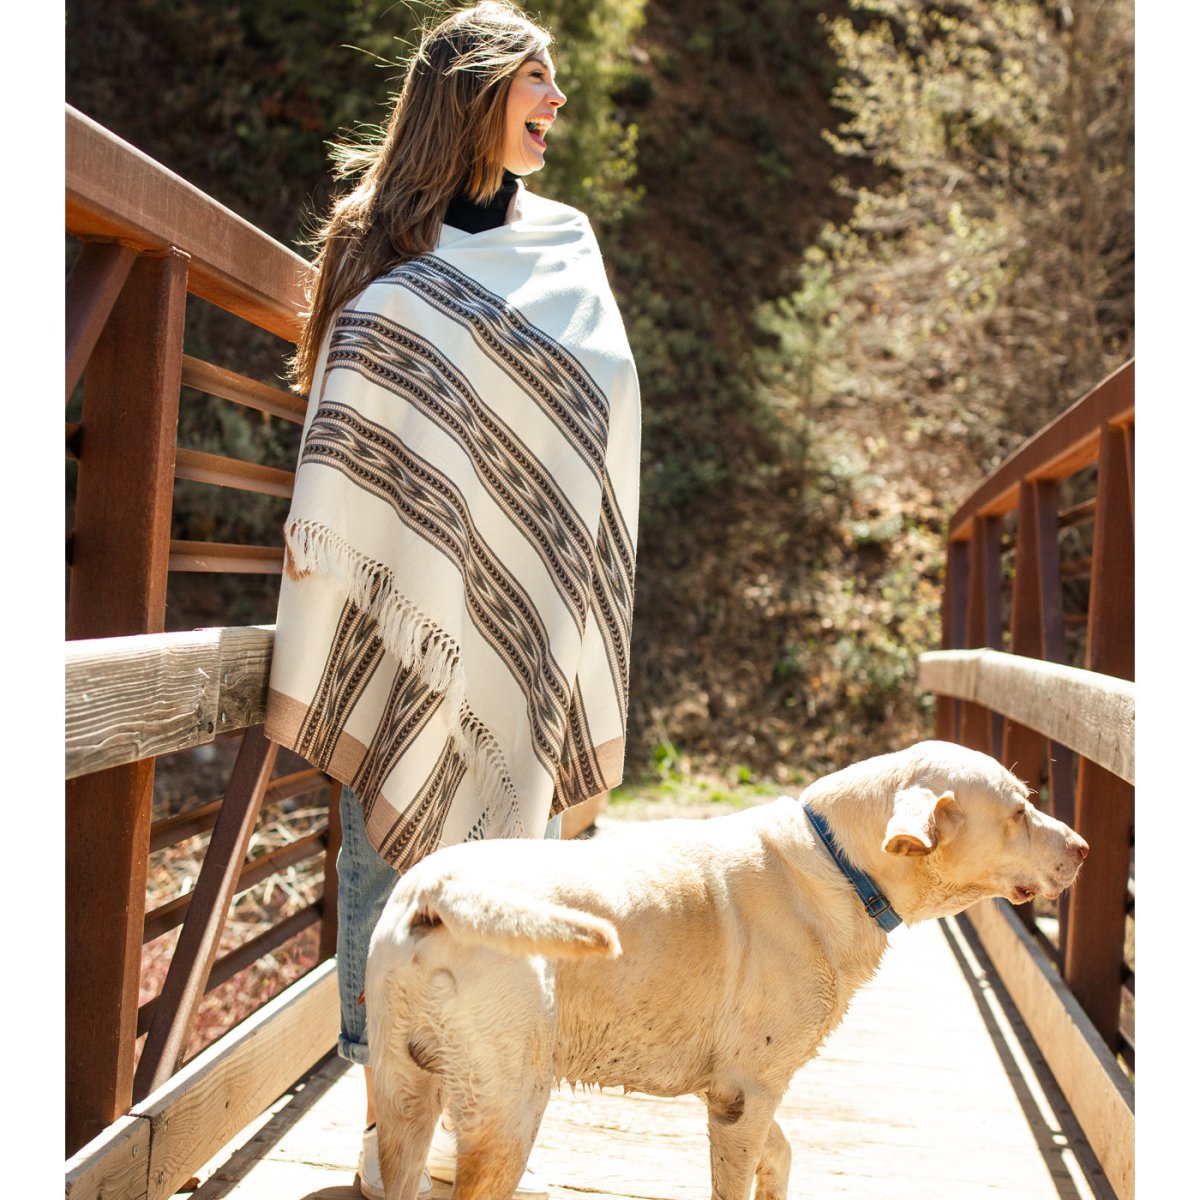 Buying a Meditation Shawl or Blanket - 8 Things To Consider